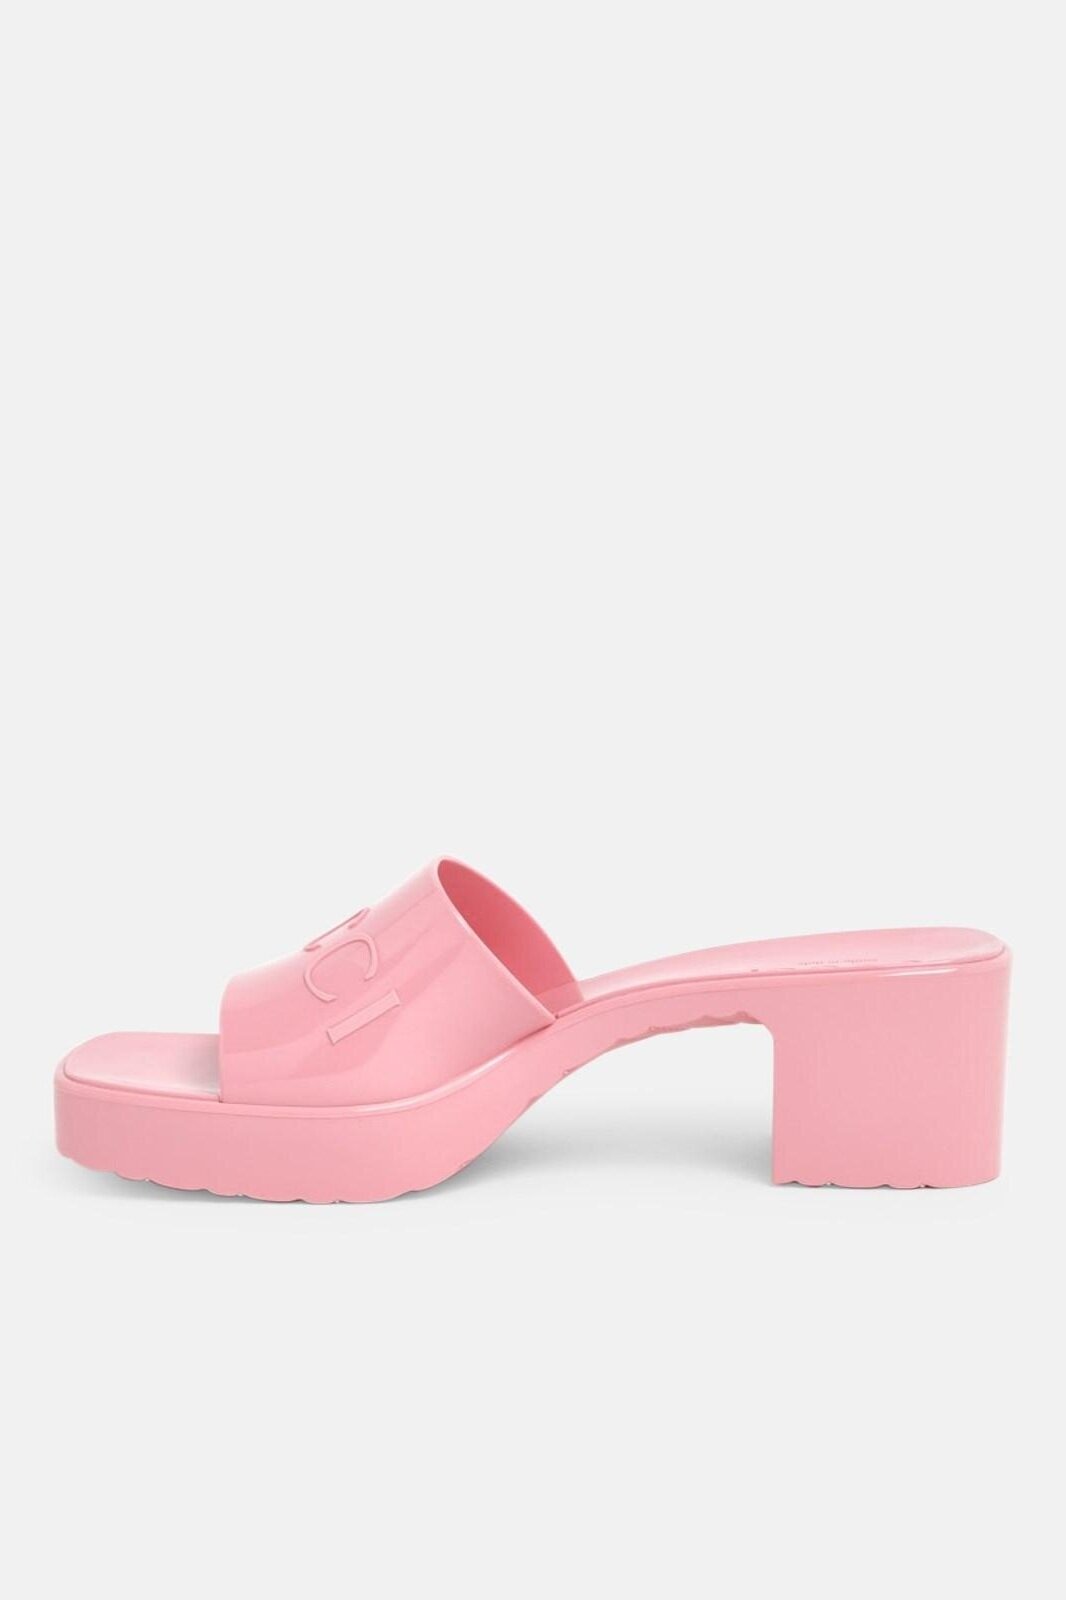 Gucci Pink Rubber Sandals ($360)